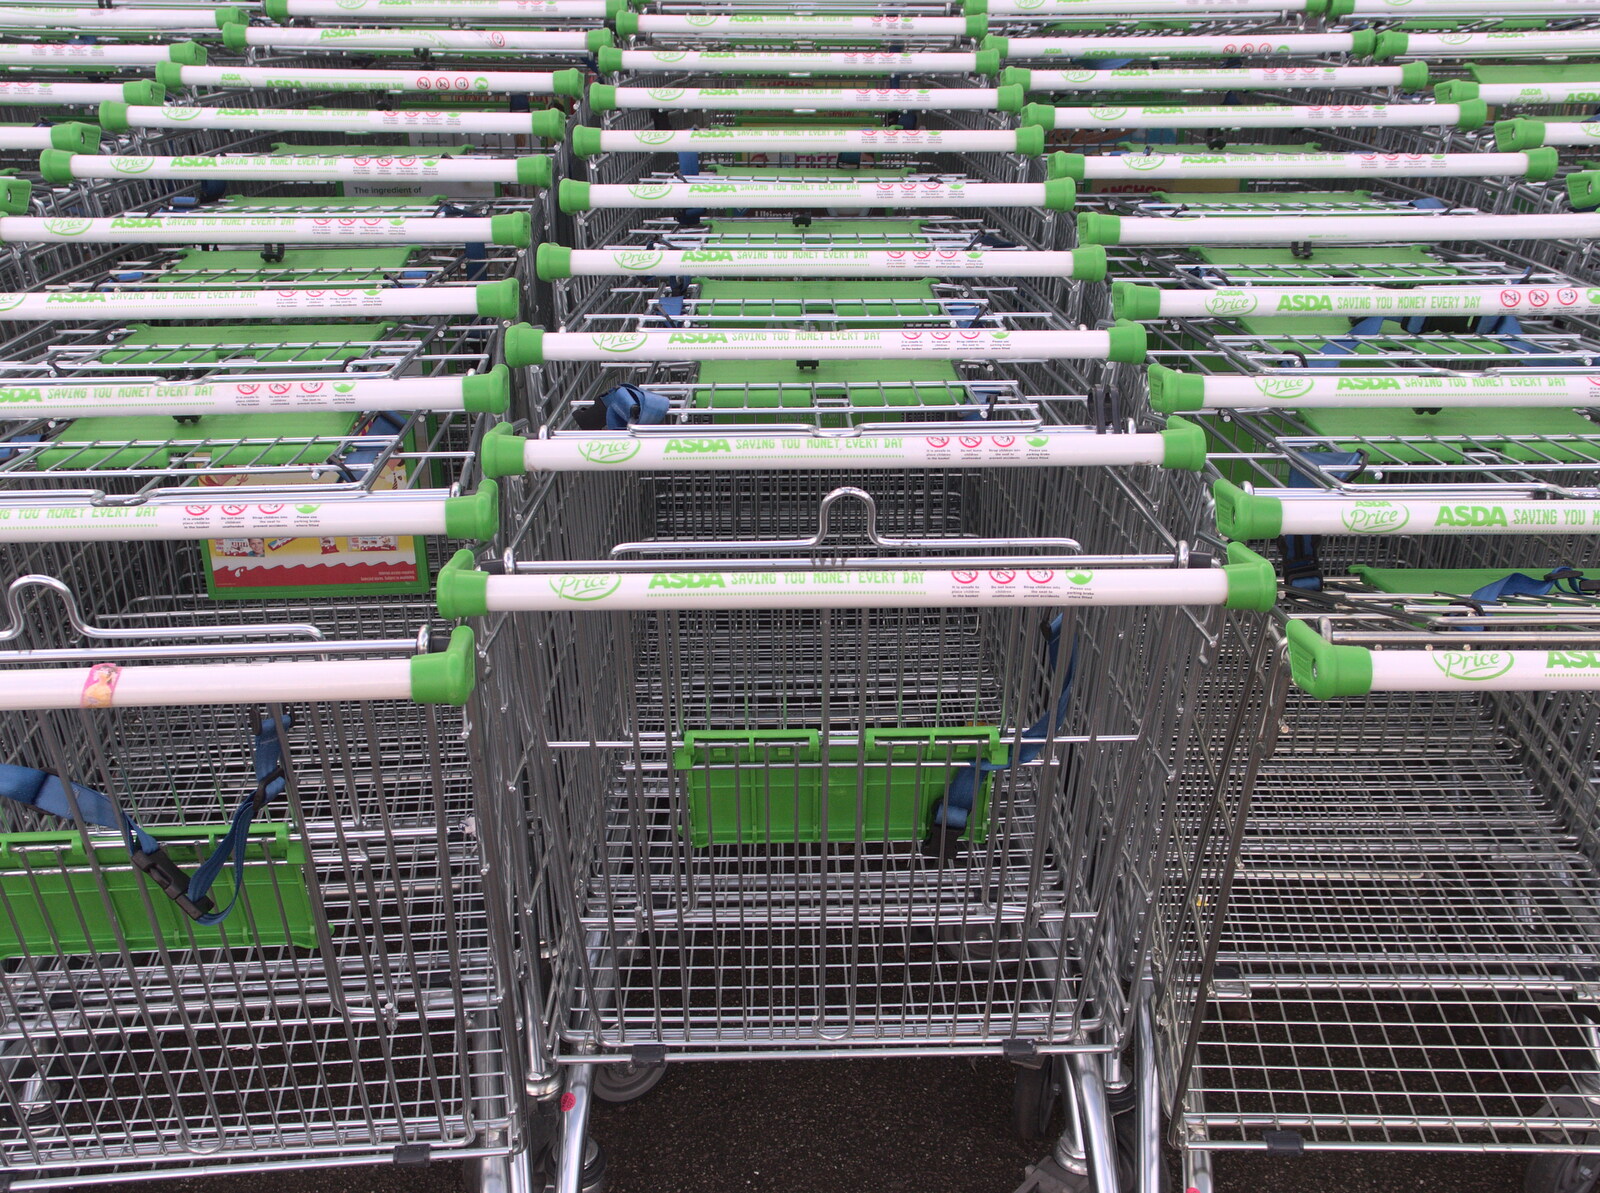 A load of Asda trolleys from A Crashed Car and Greenhouse Demolition, Brome, Suffolk - 20th March 2015